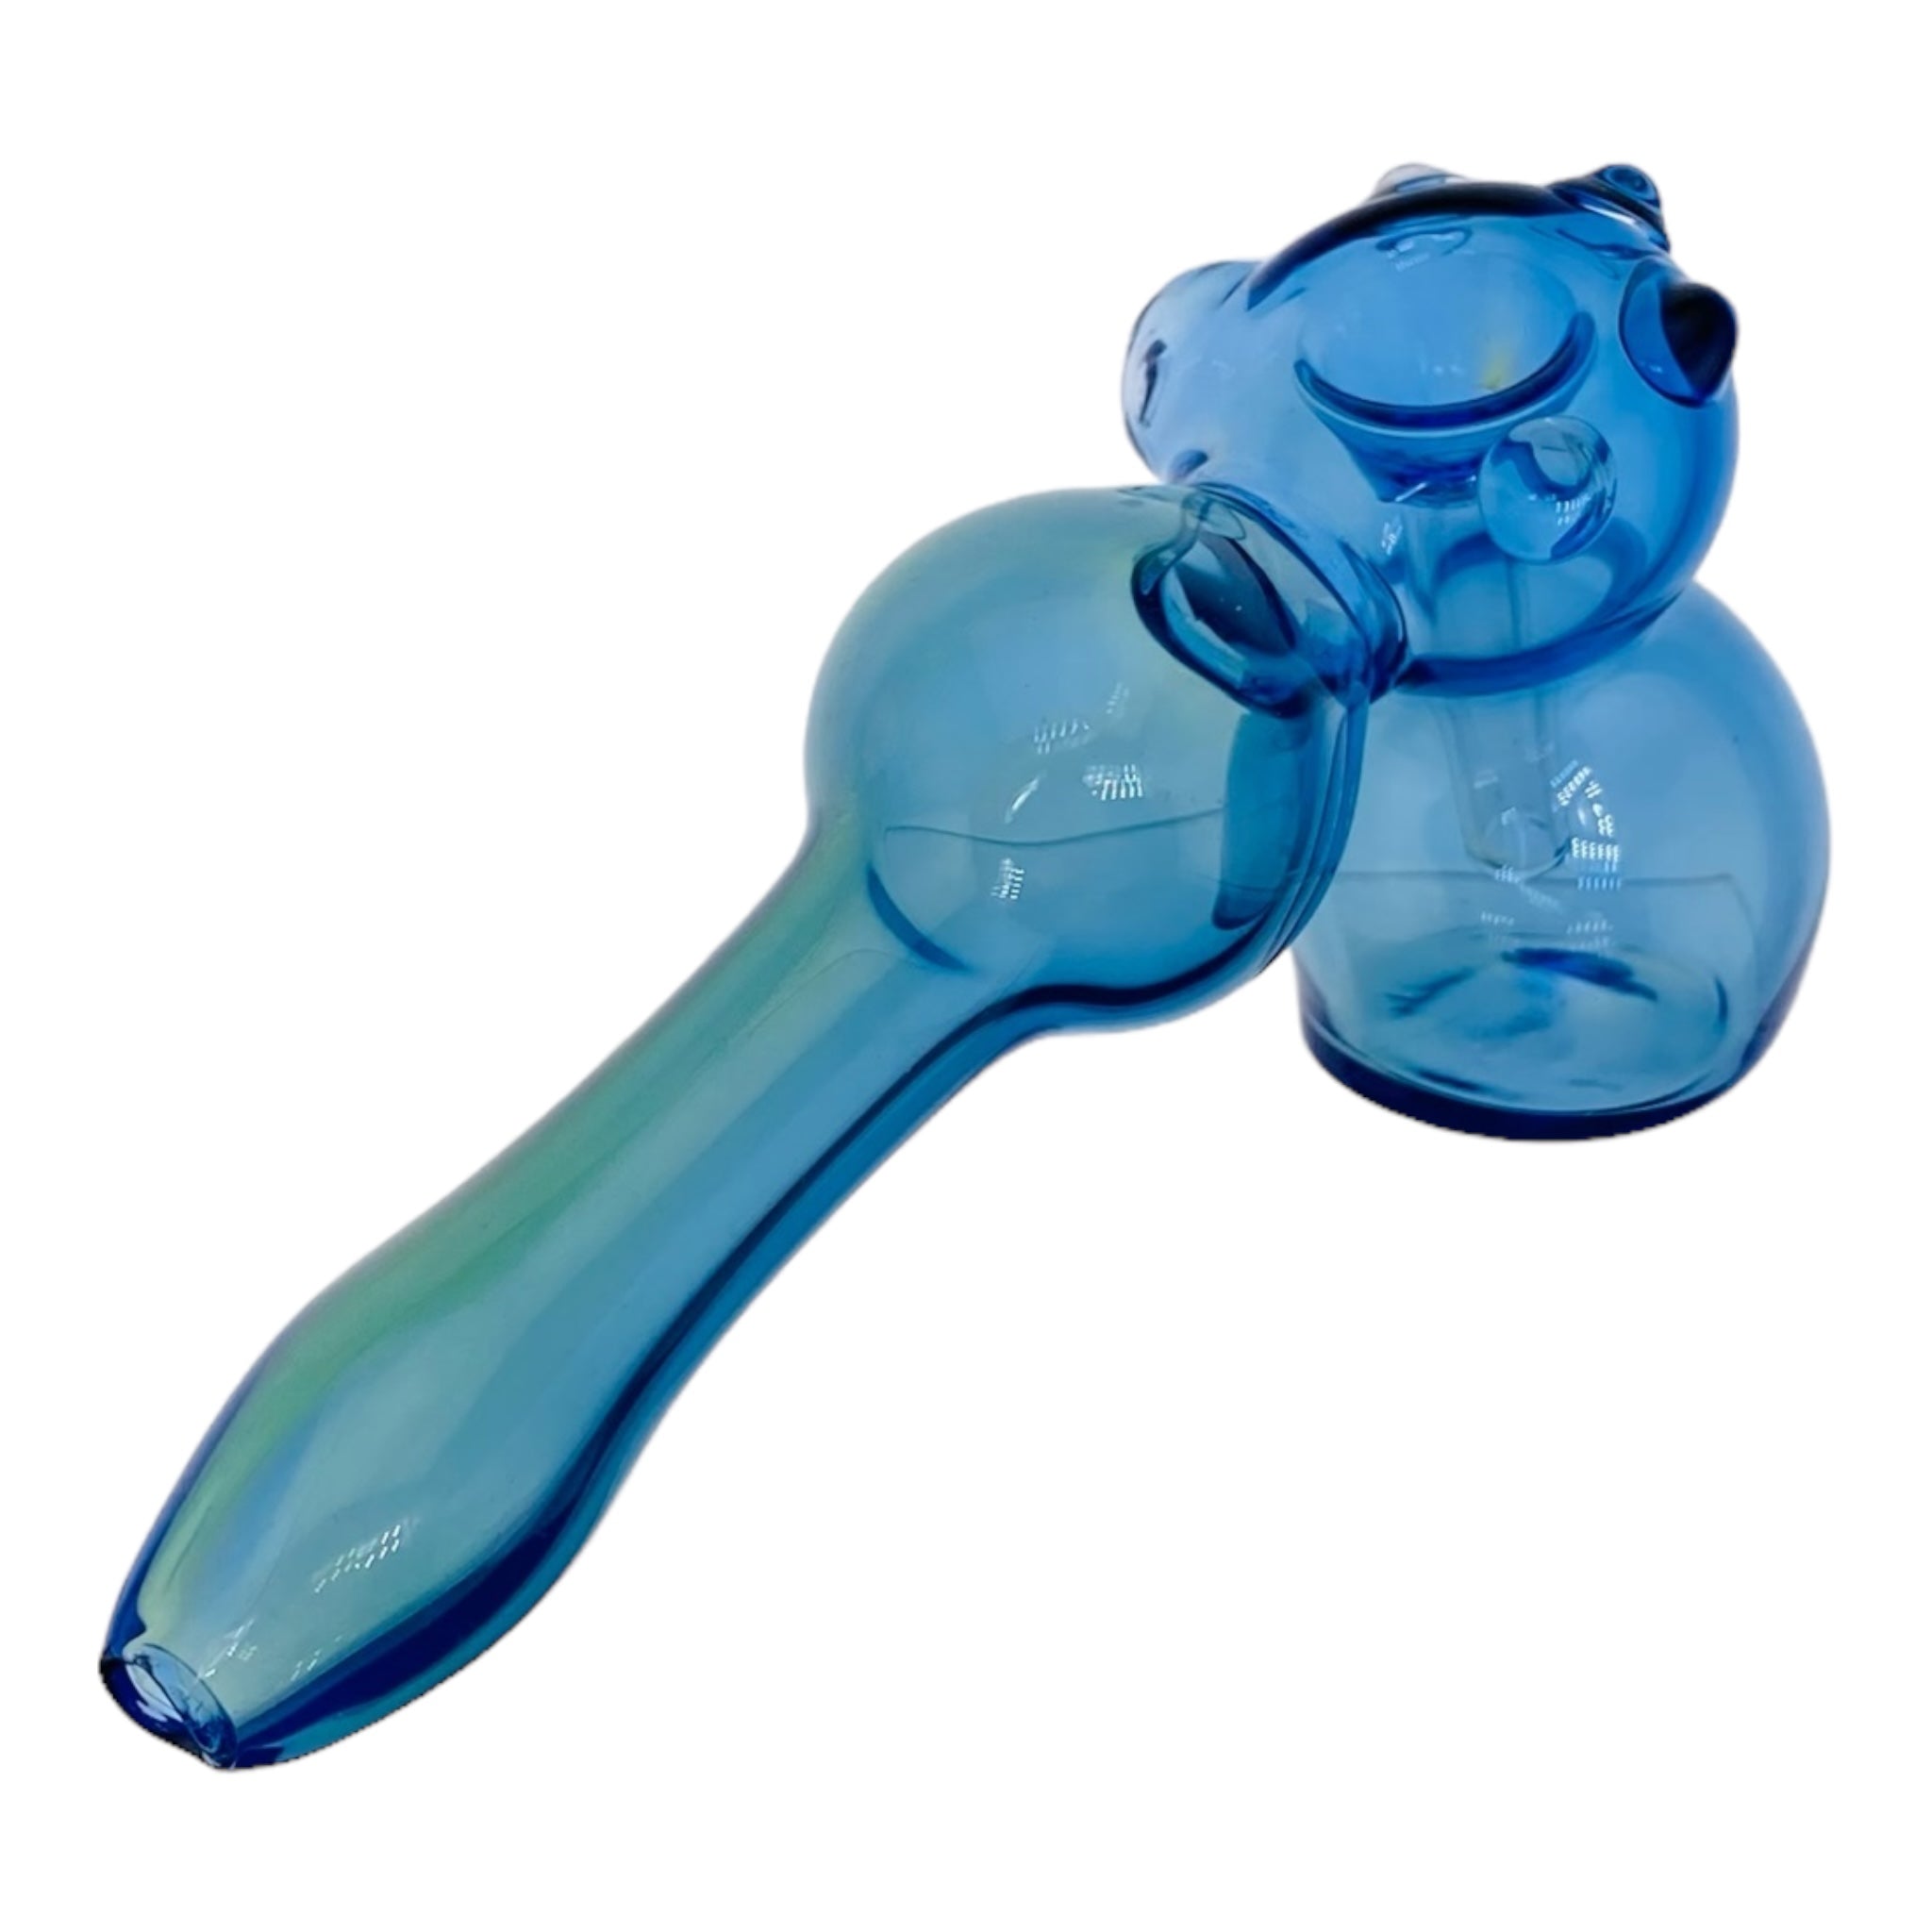 Cobalt Blue Laydown Glass Bubbler Water Pipe for weed for sale